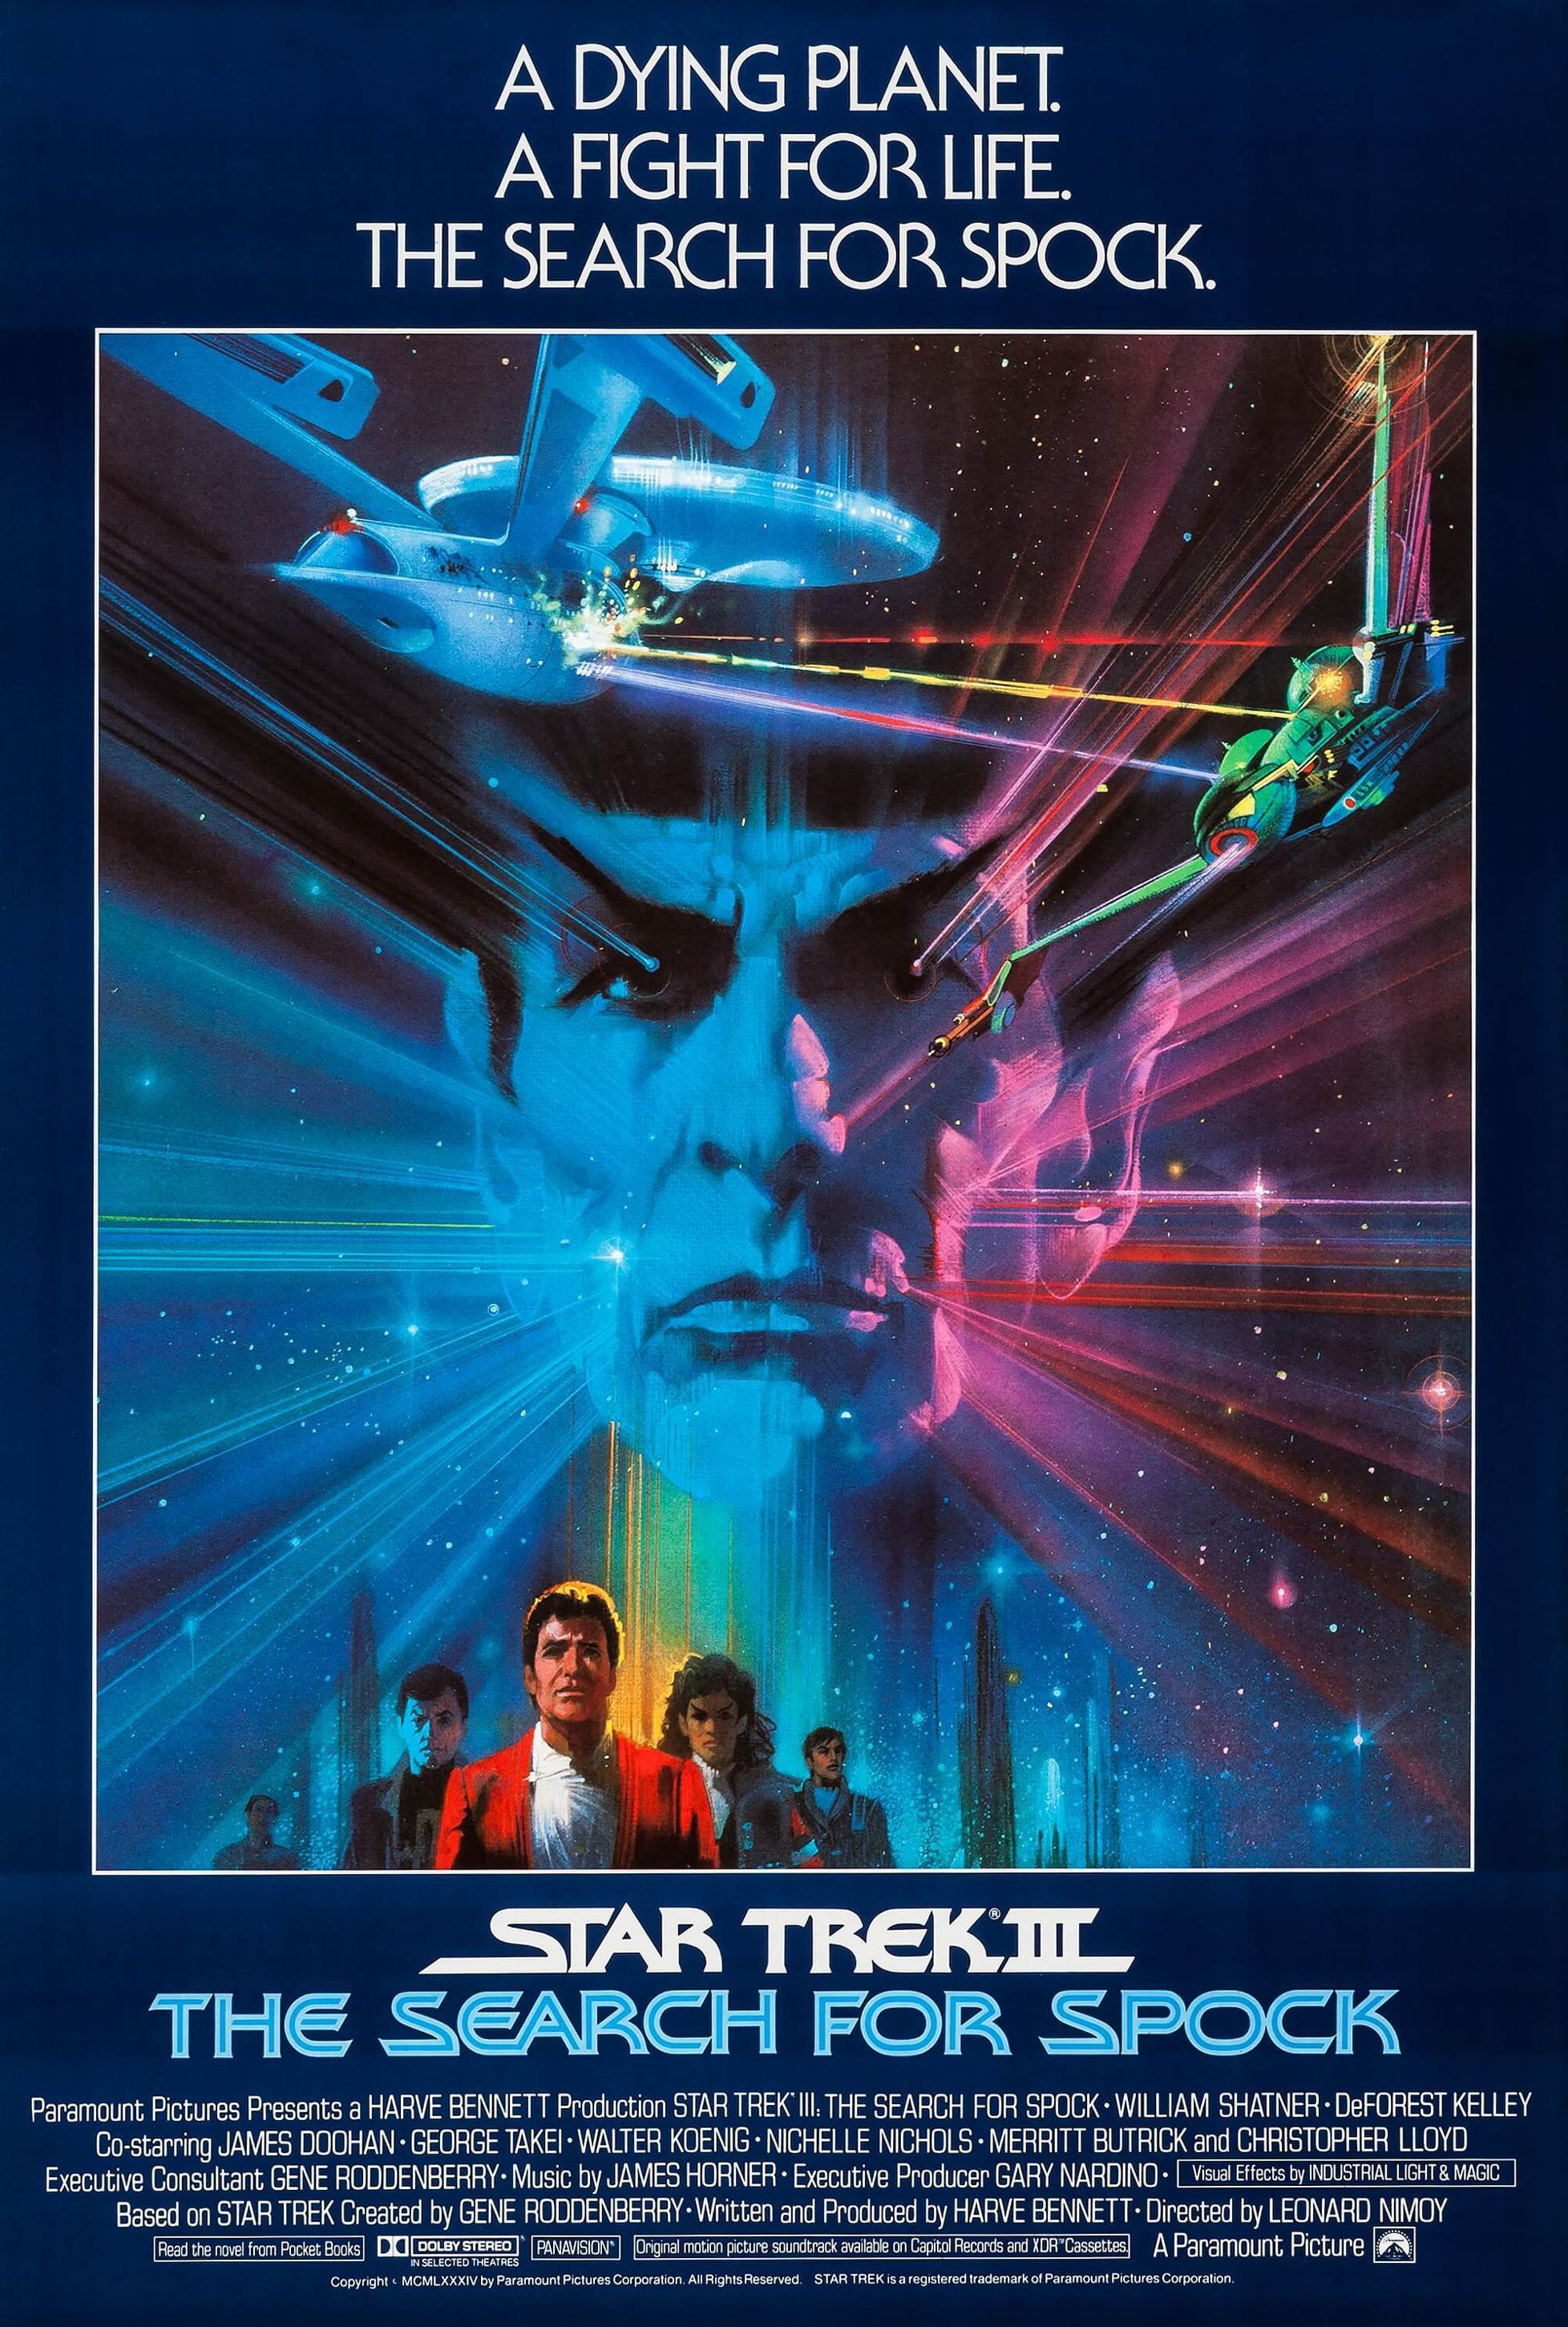 star trek iii the search for spock film poster